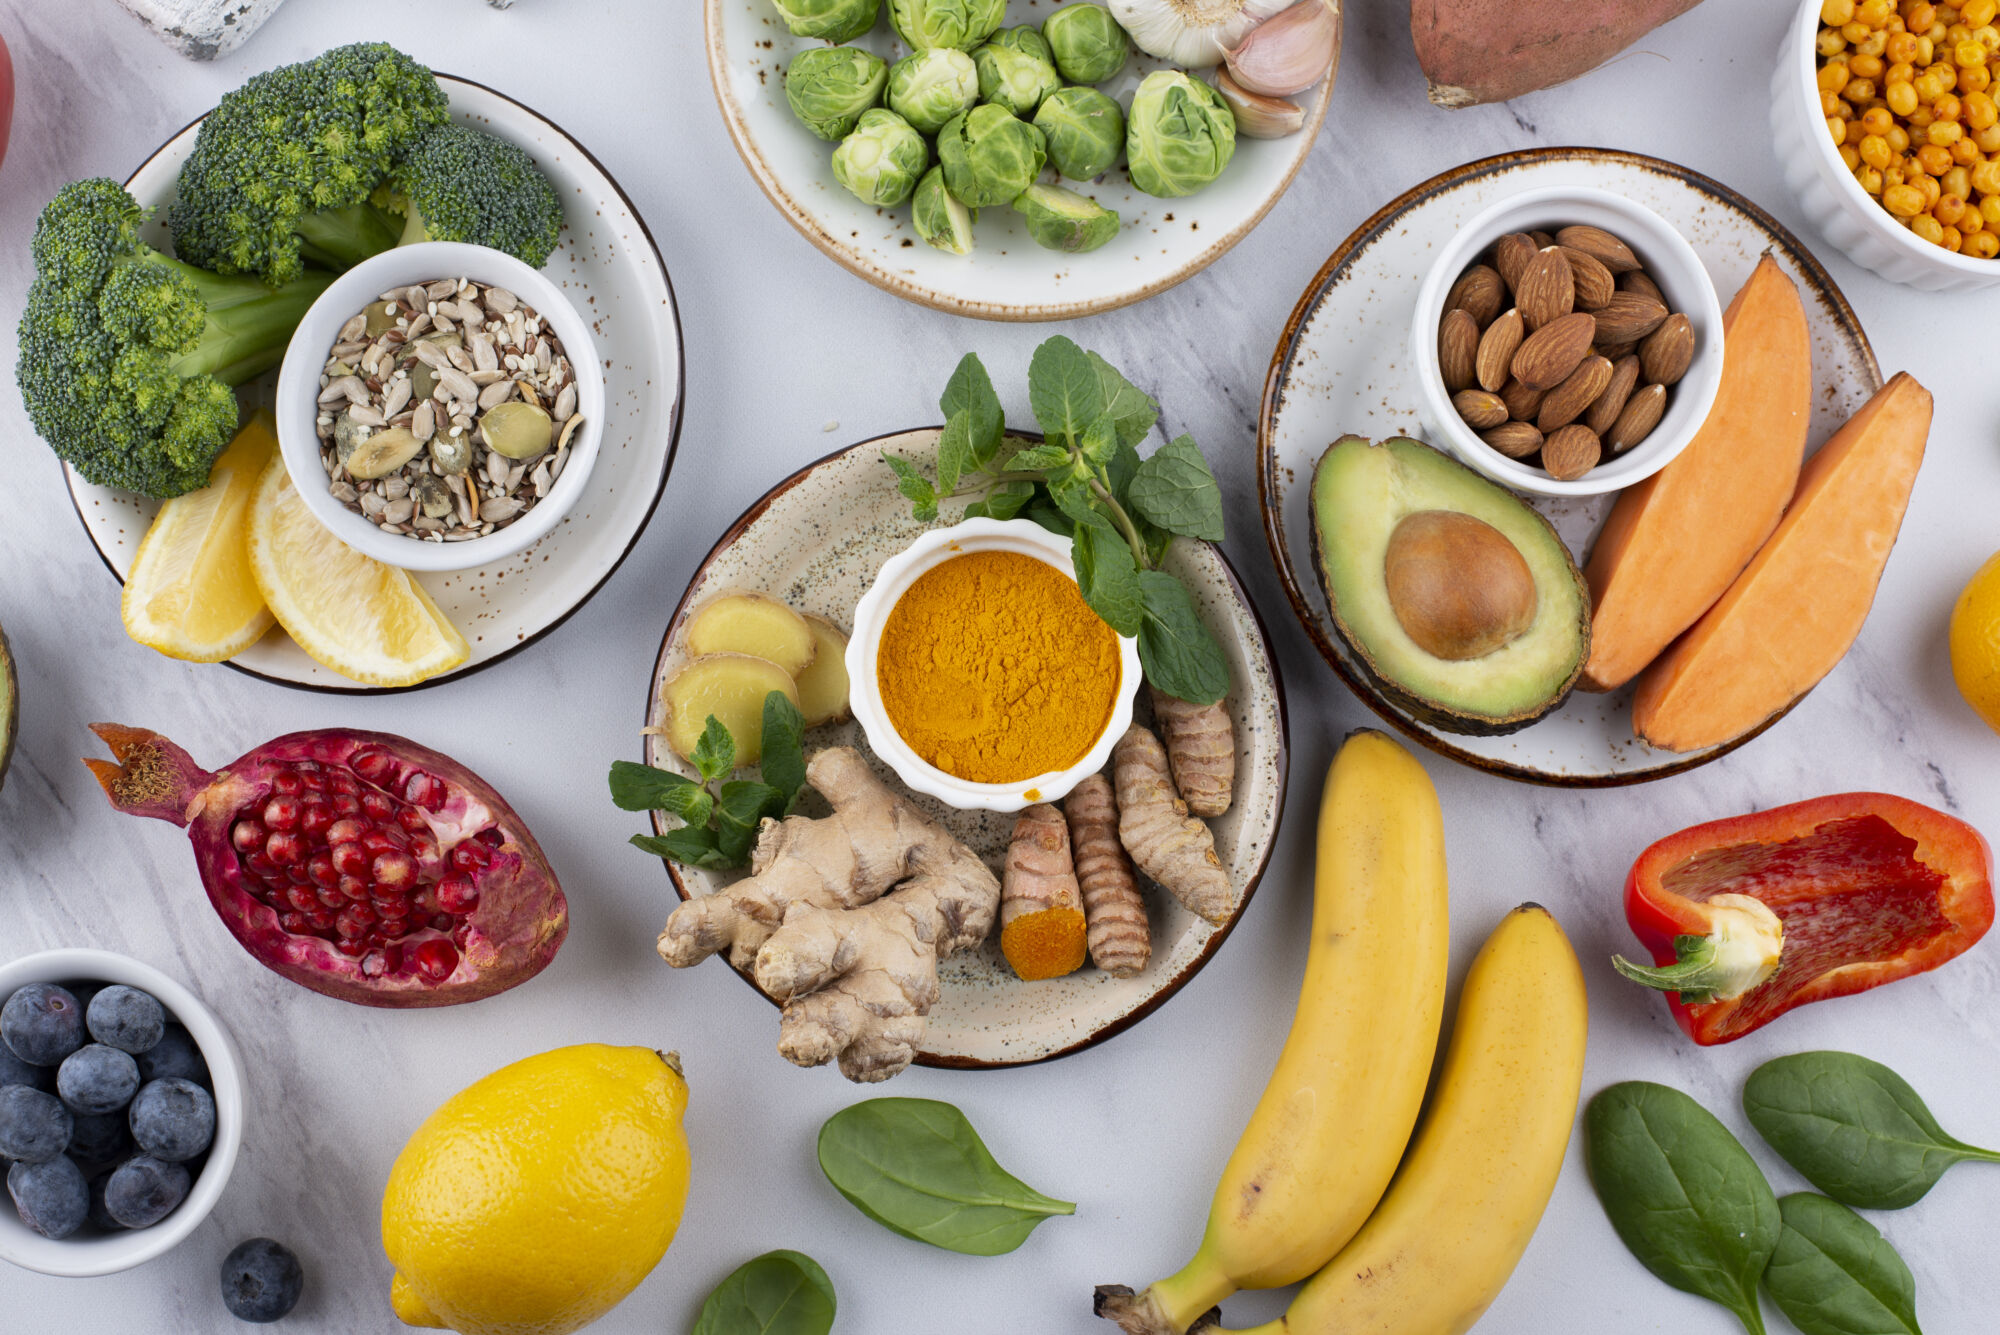 naturopathic doctor help food allergies selection in bowls with vegetables, fruits, nuts, brussels sprouts, brocolli, avocado, banana, sweet potatoe, ginger, pomegranate, peppers, almonds, corn, lemon, tumeric, mint, spinach, blueberry, garlic, sunflower seeds, oranges, citrus